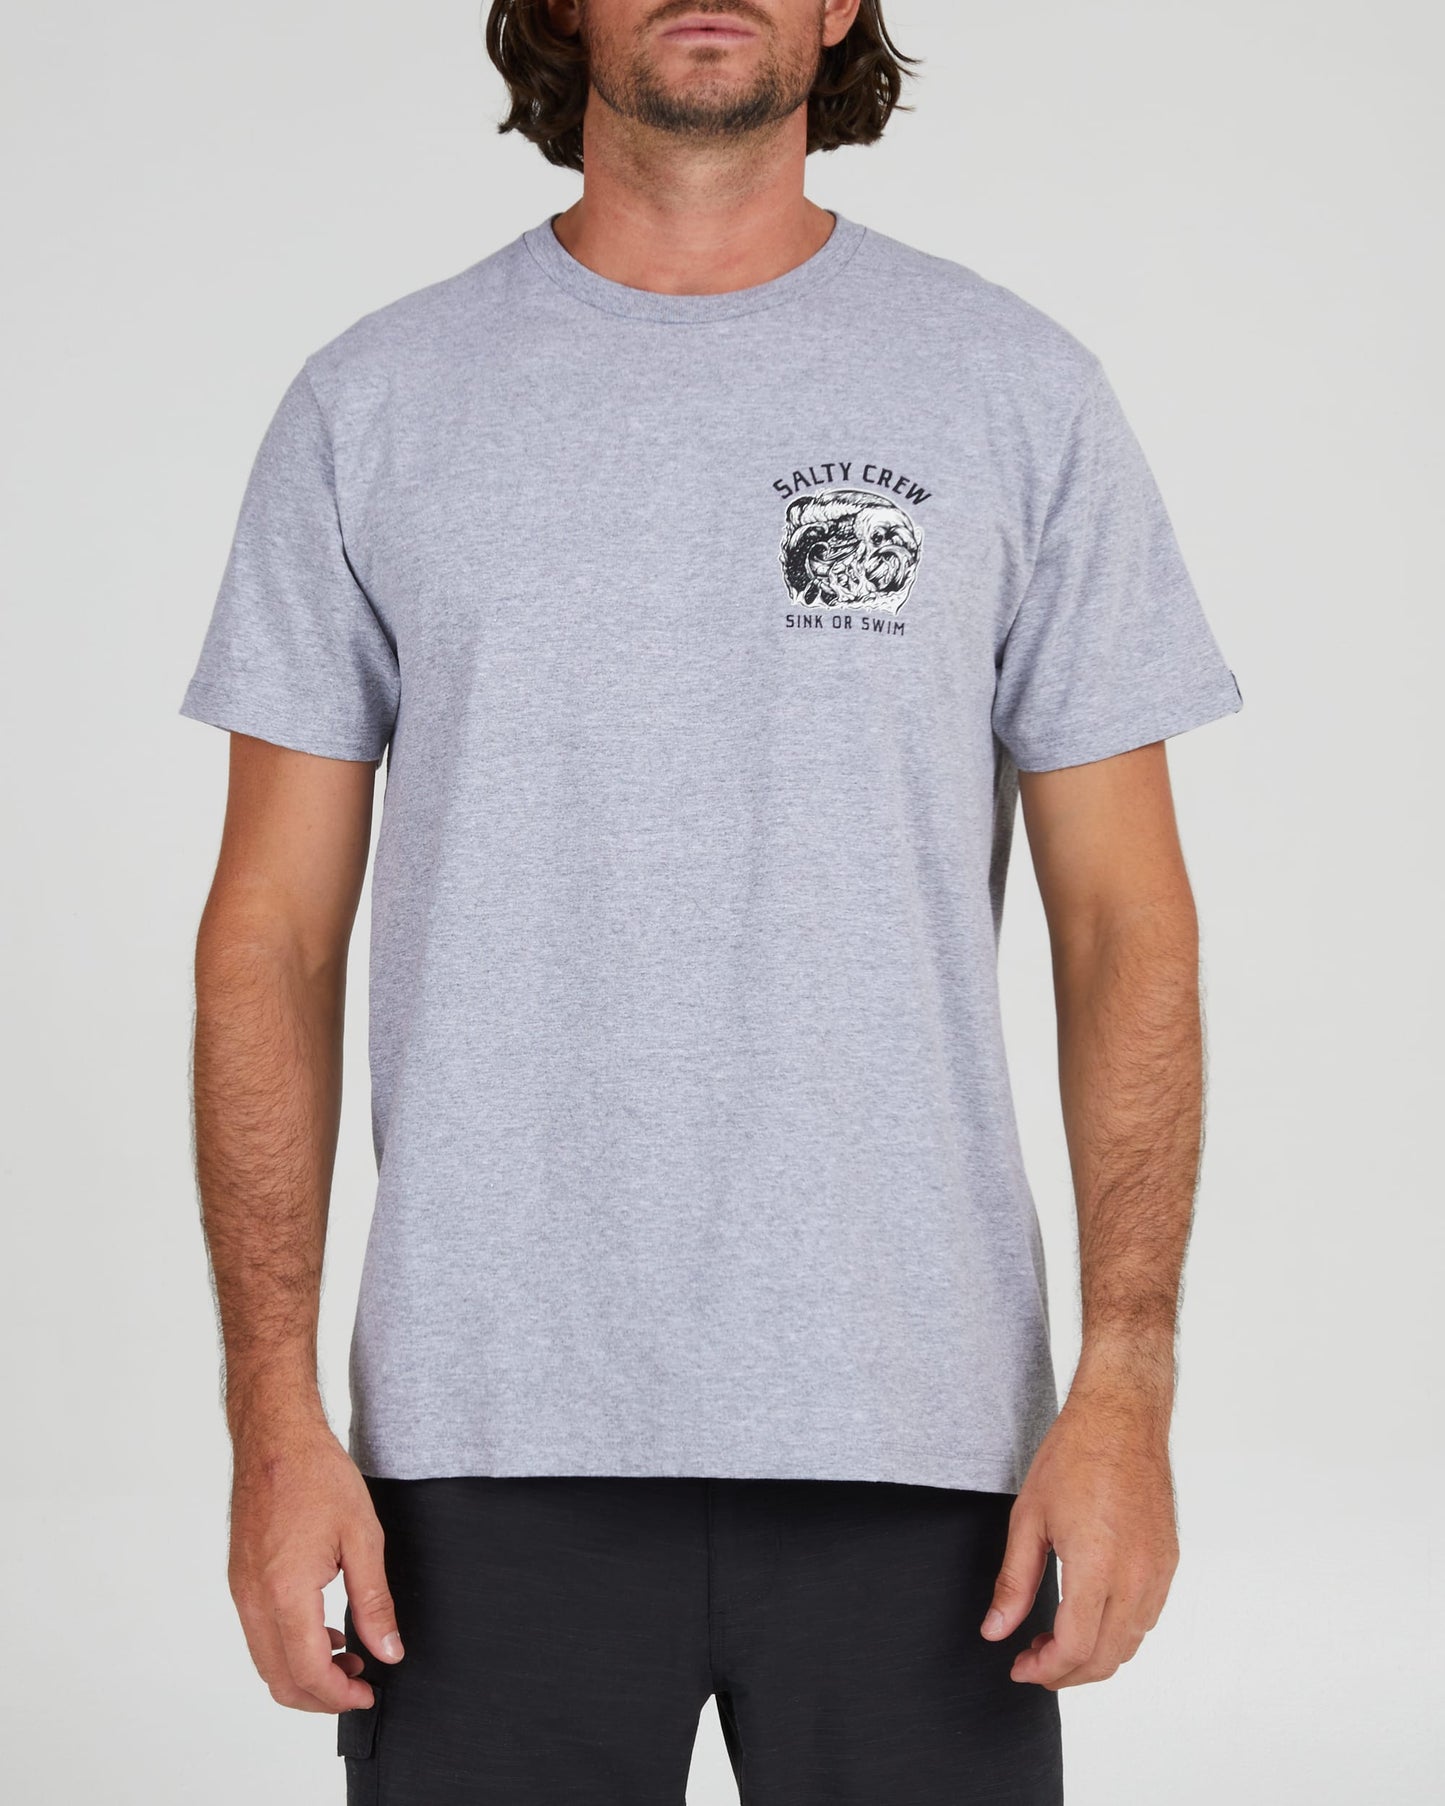 Salty crew T-SHIRTS S/S TSUNAMI STANDARD S/S TEE - Athletic Heather in Athletic Heather